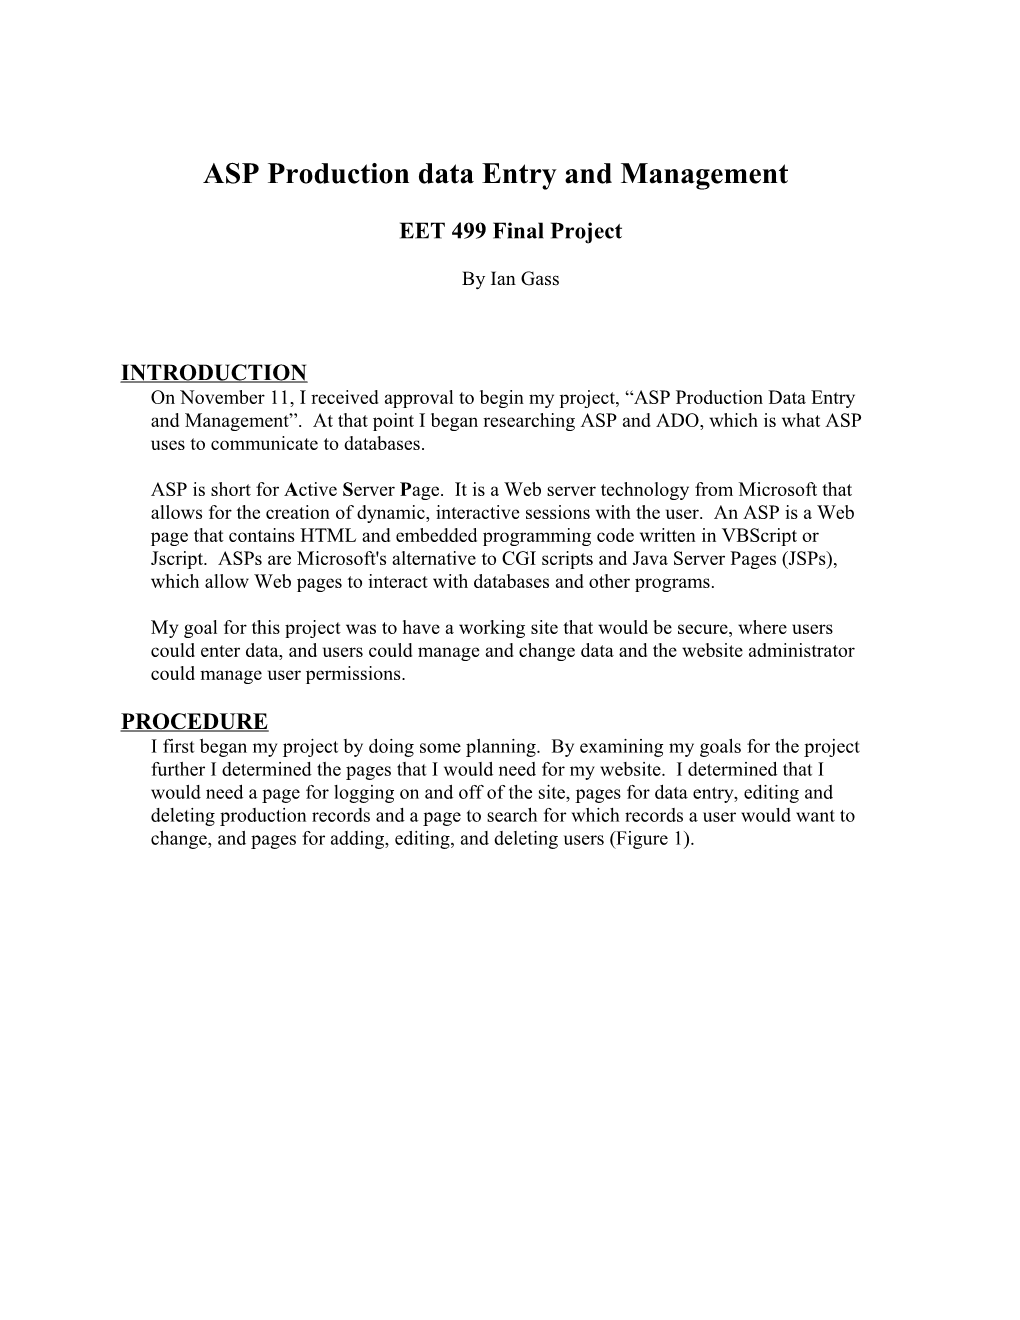 ASP Production Data Entry and Management